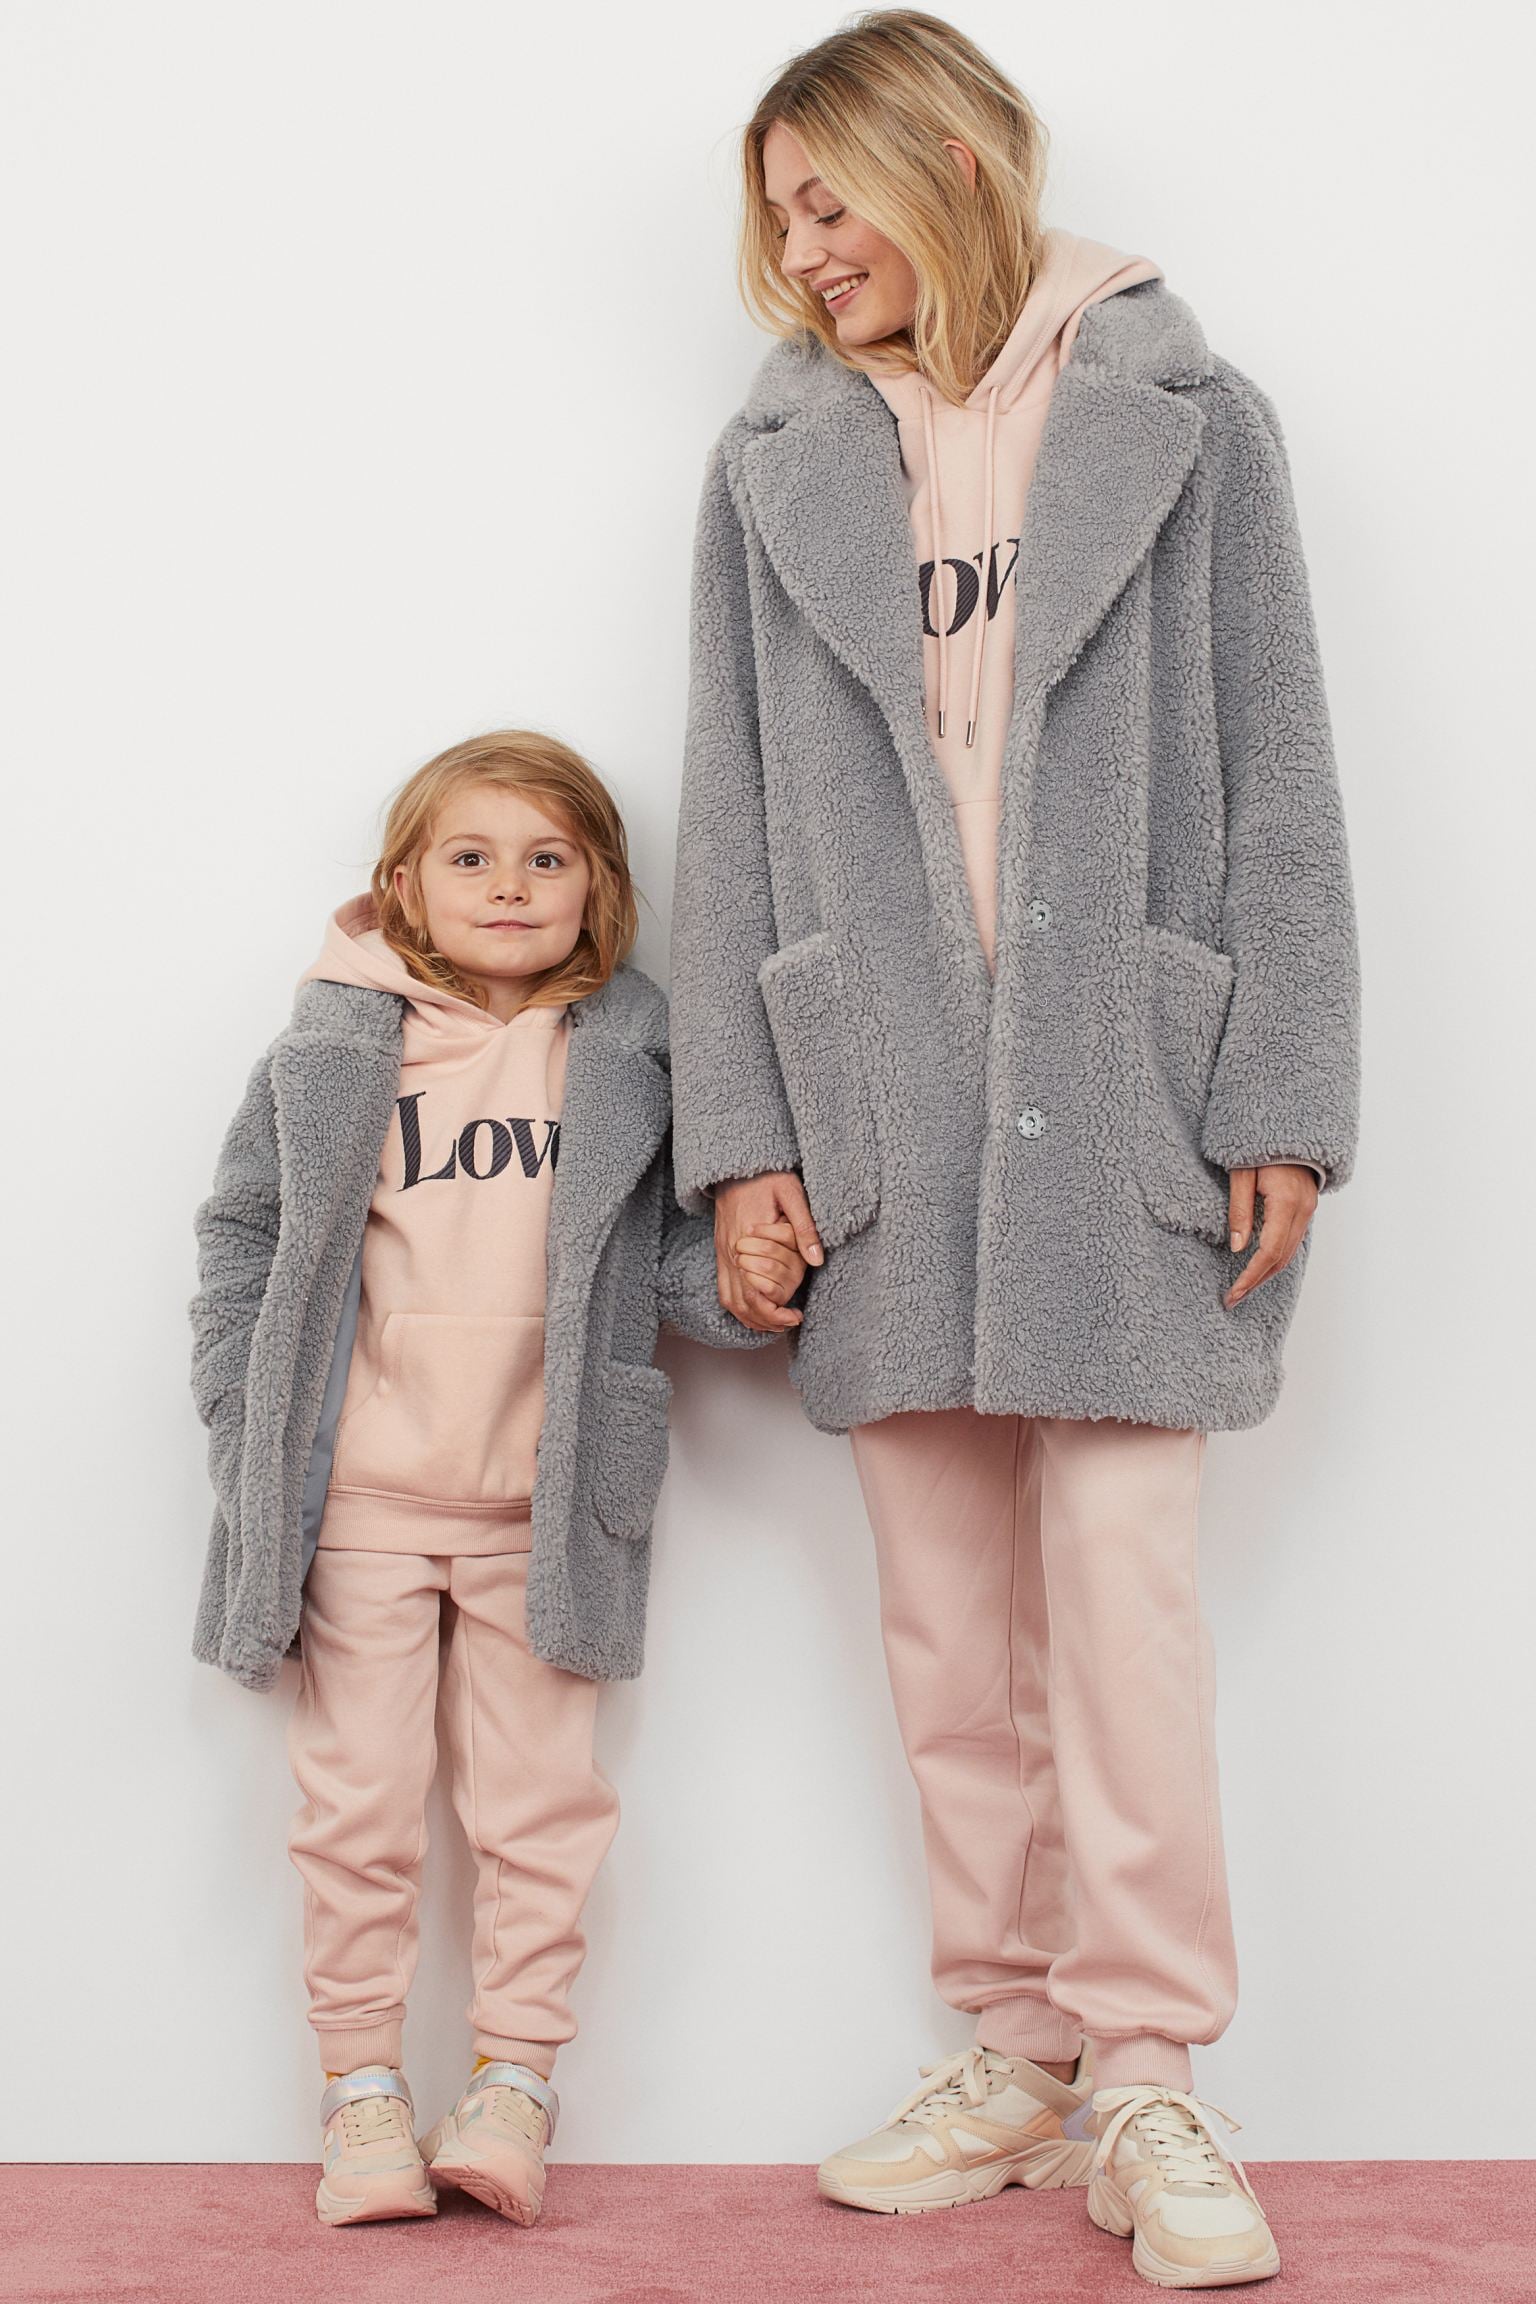 h&m matching family outfits